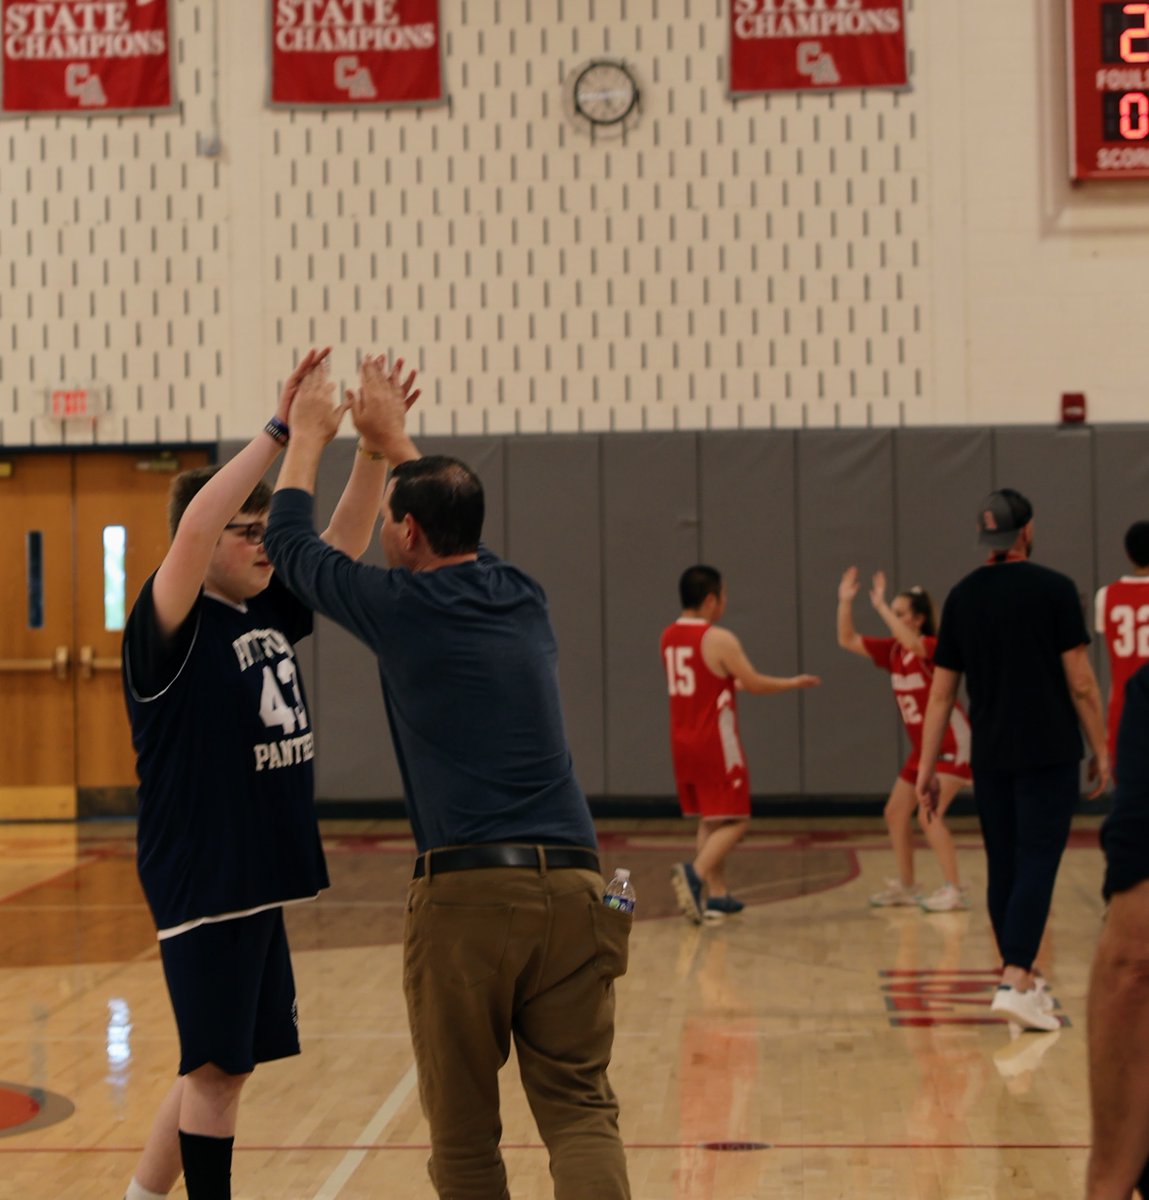 High fives for all! This is what unified sports is all about! Canandaigua Academy vs. Pittsford - May 16 @PCSDAthletics @UnifiedSportsNY @sectionvunified @CdgaUnified @PrimetimeBall_